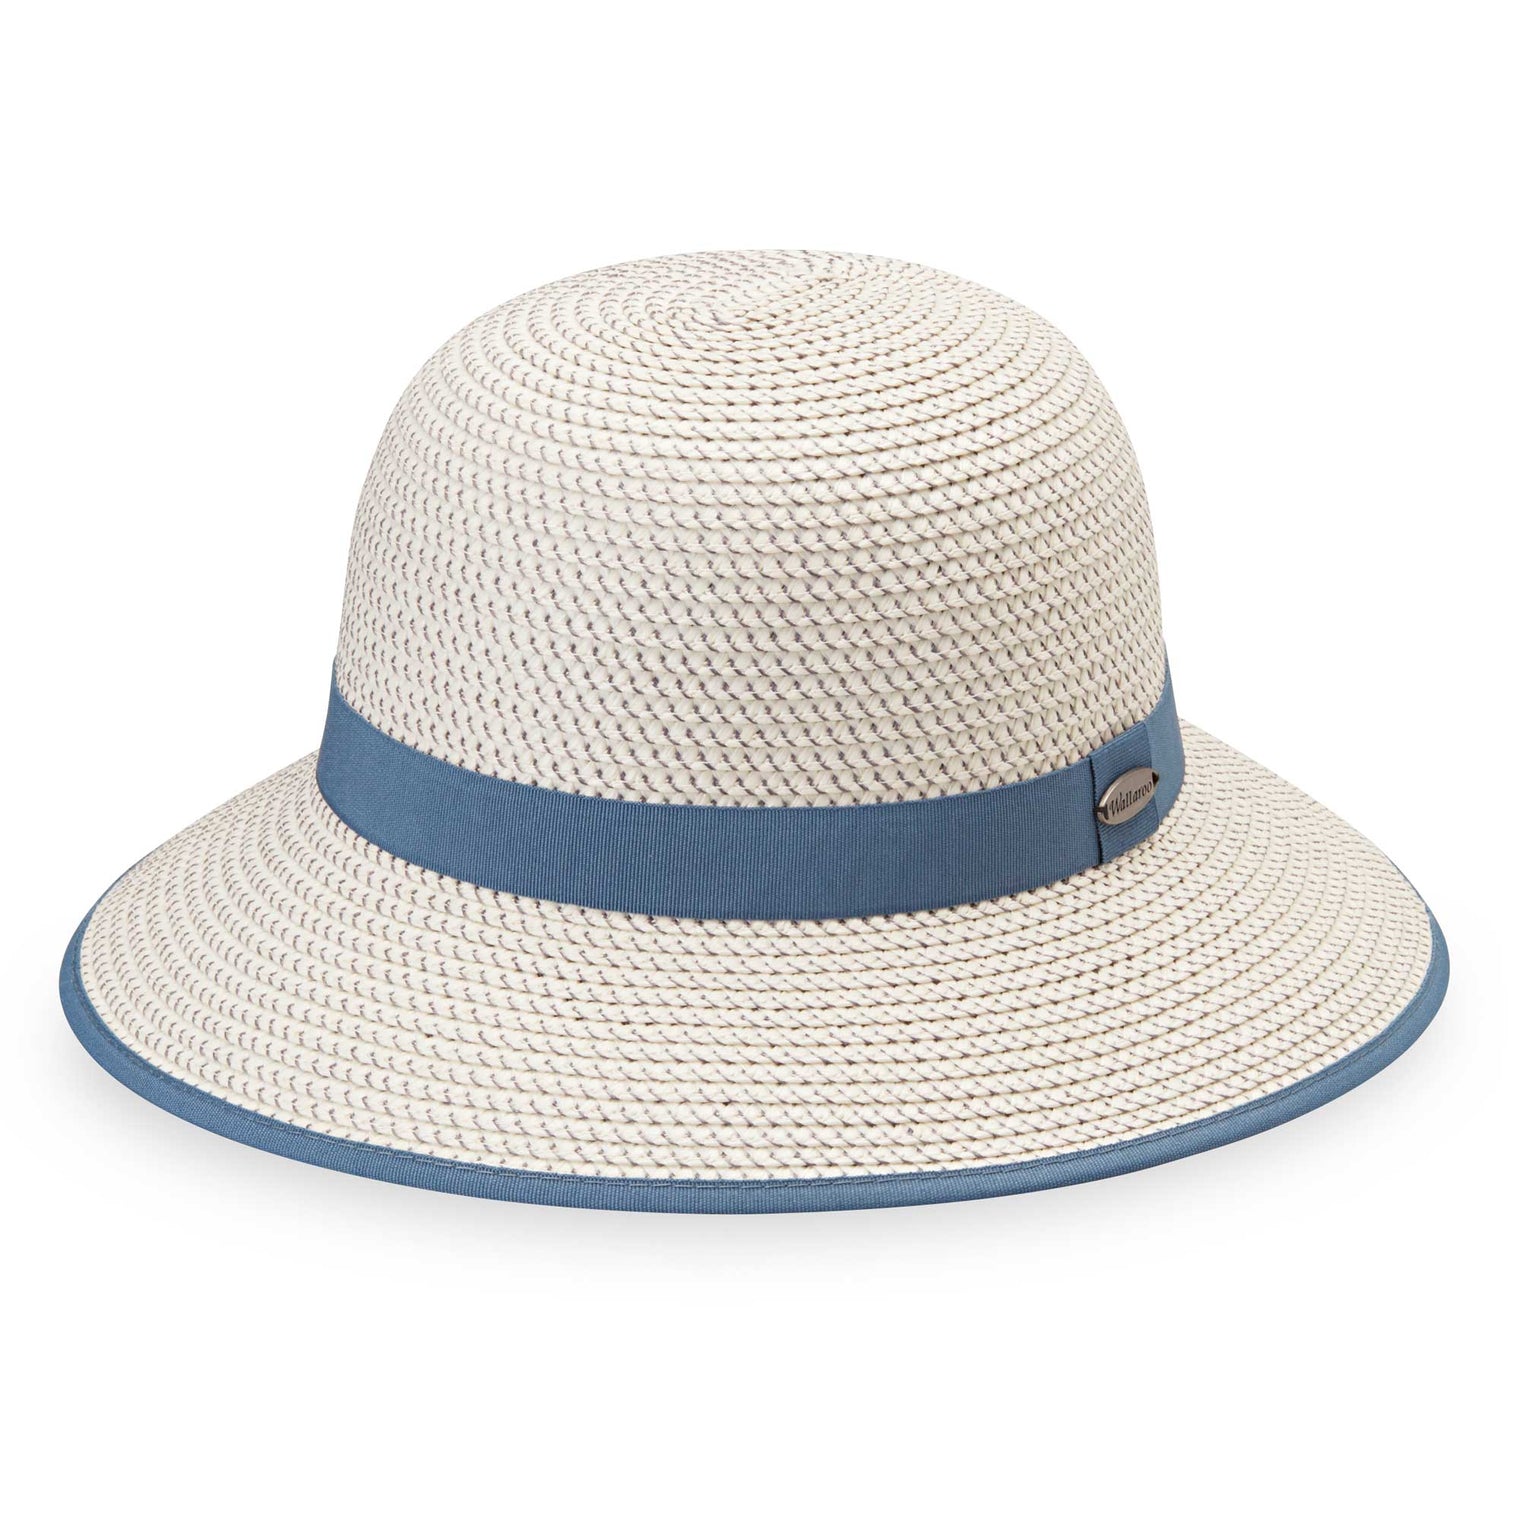 Featuring Women's bucket style sun hat by Wallaroo. Made with packable, UPF 50 material.